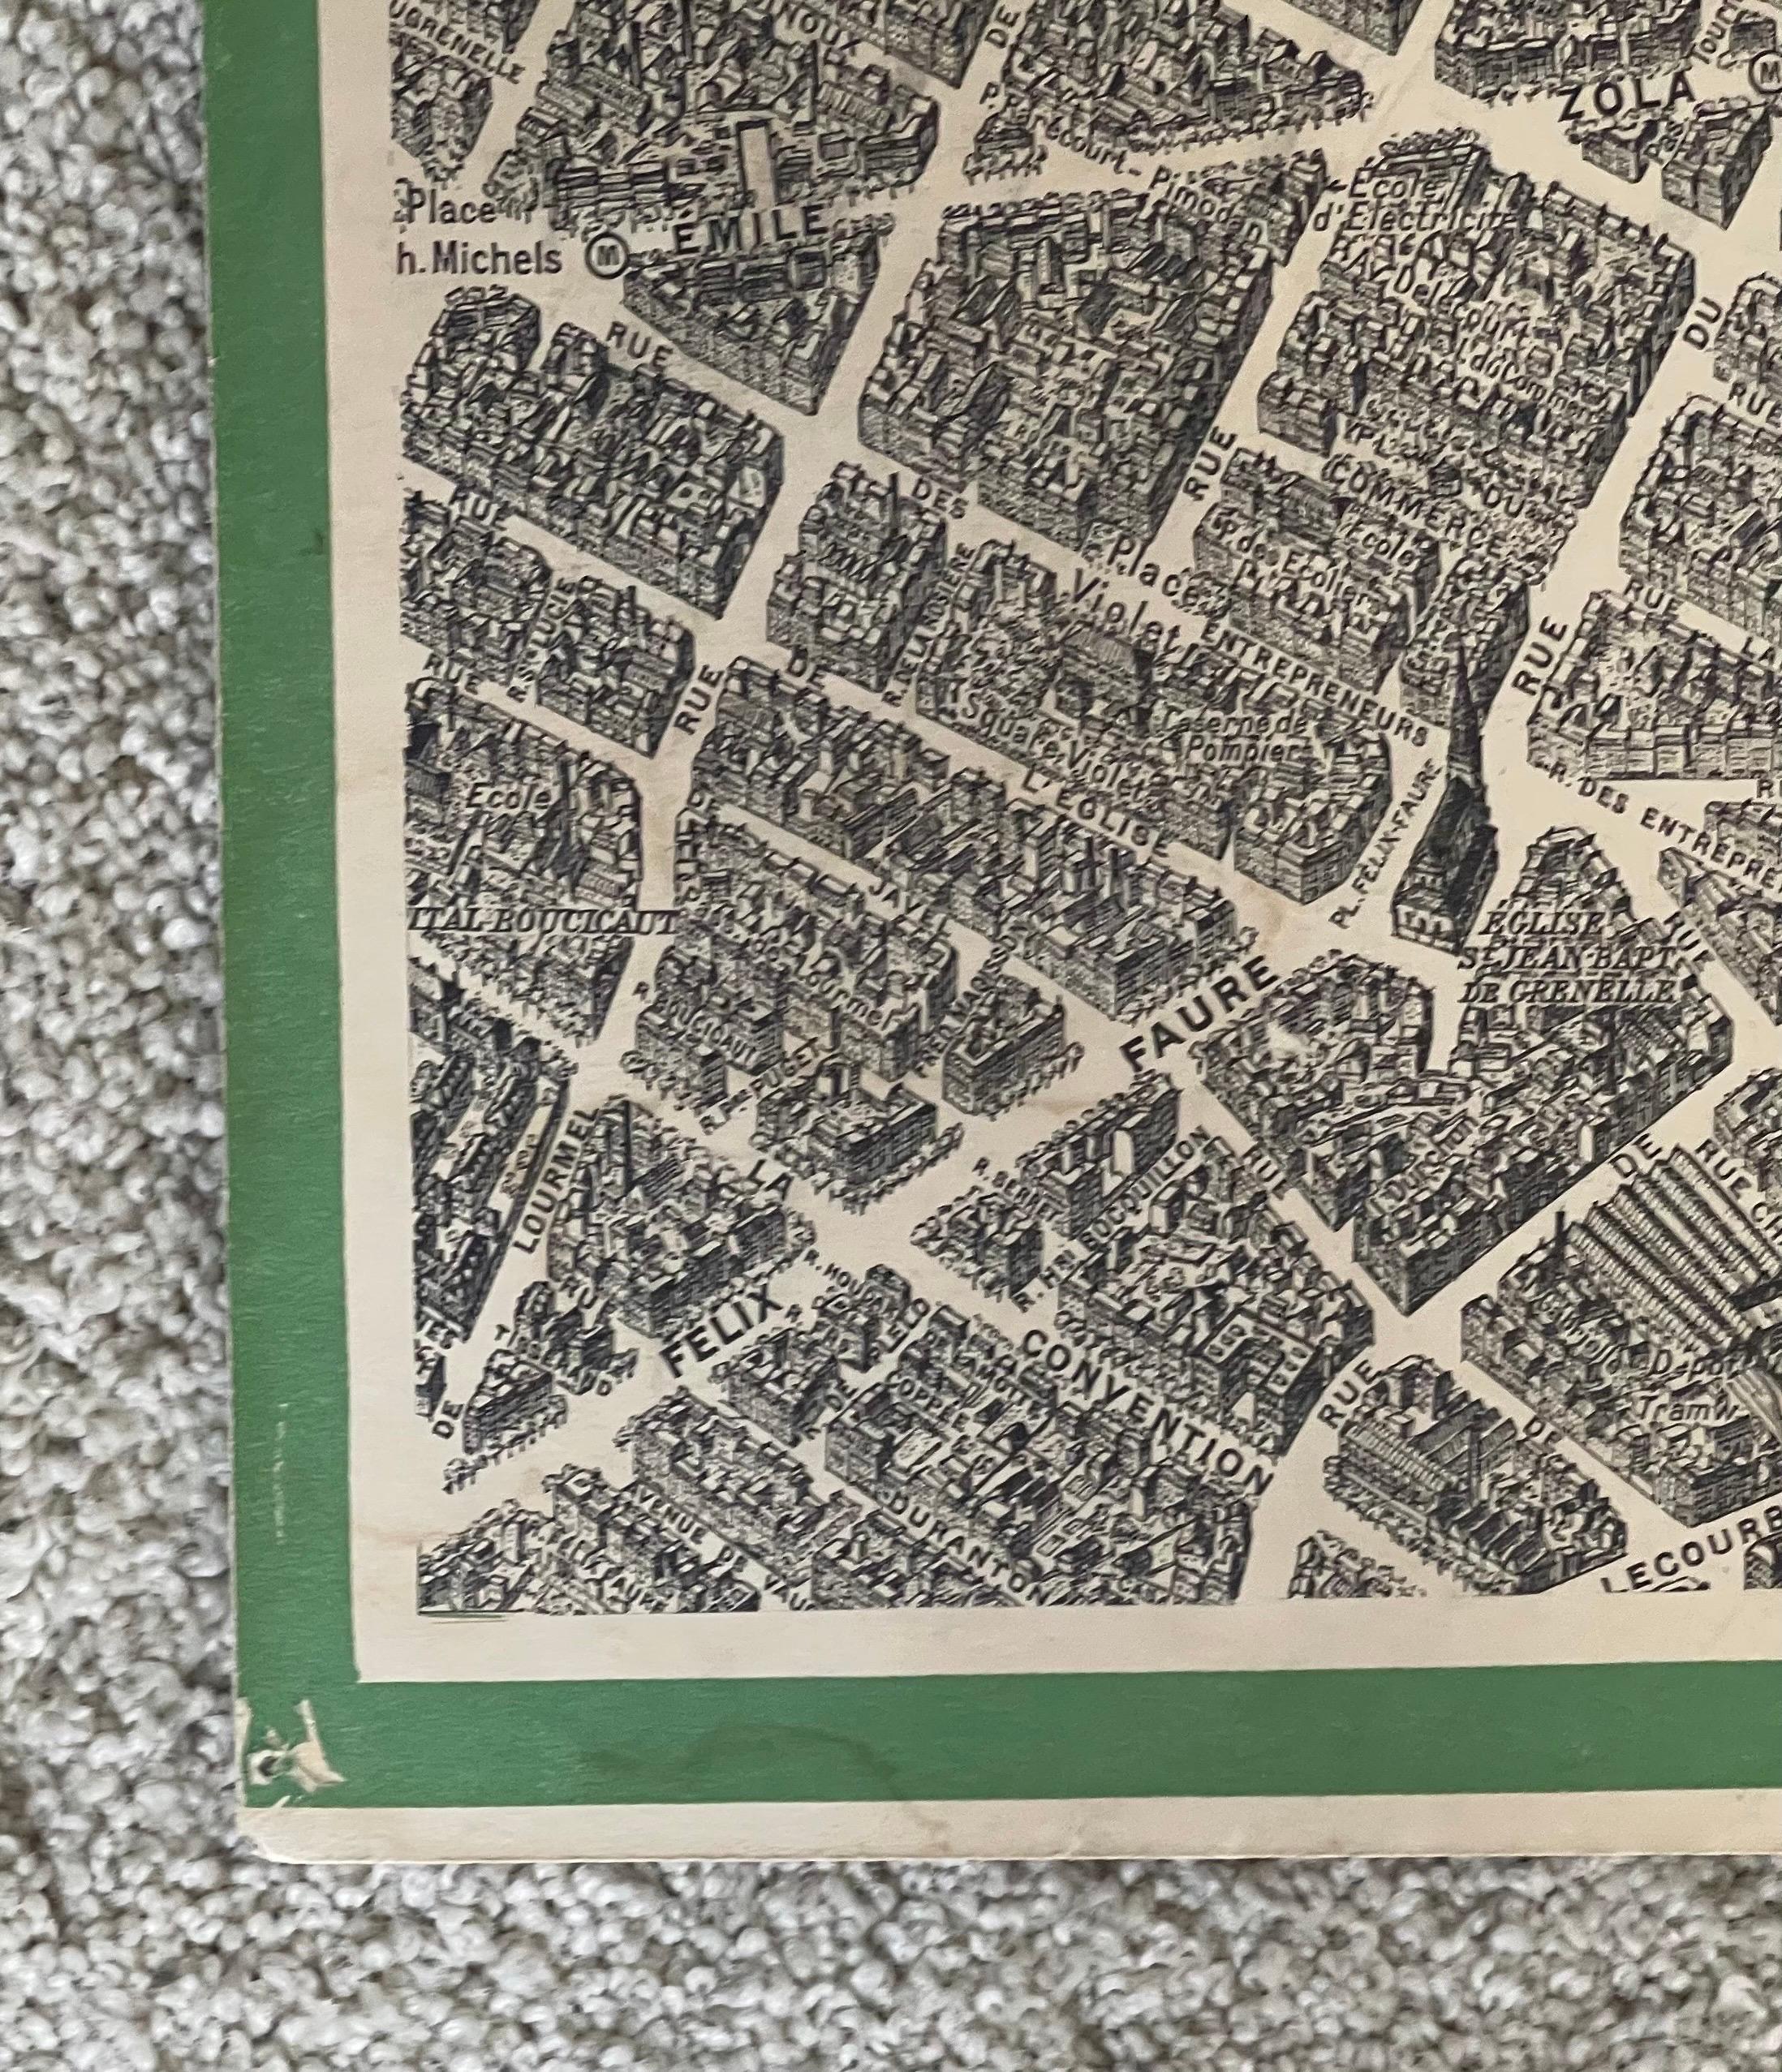 Lithographiekarte „View of the Center of Paris Taken from the Air“ im Angebot 4